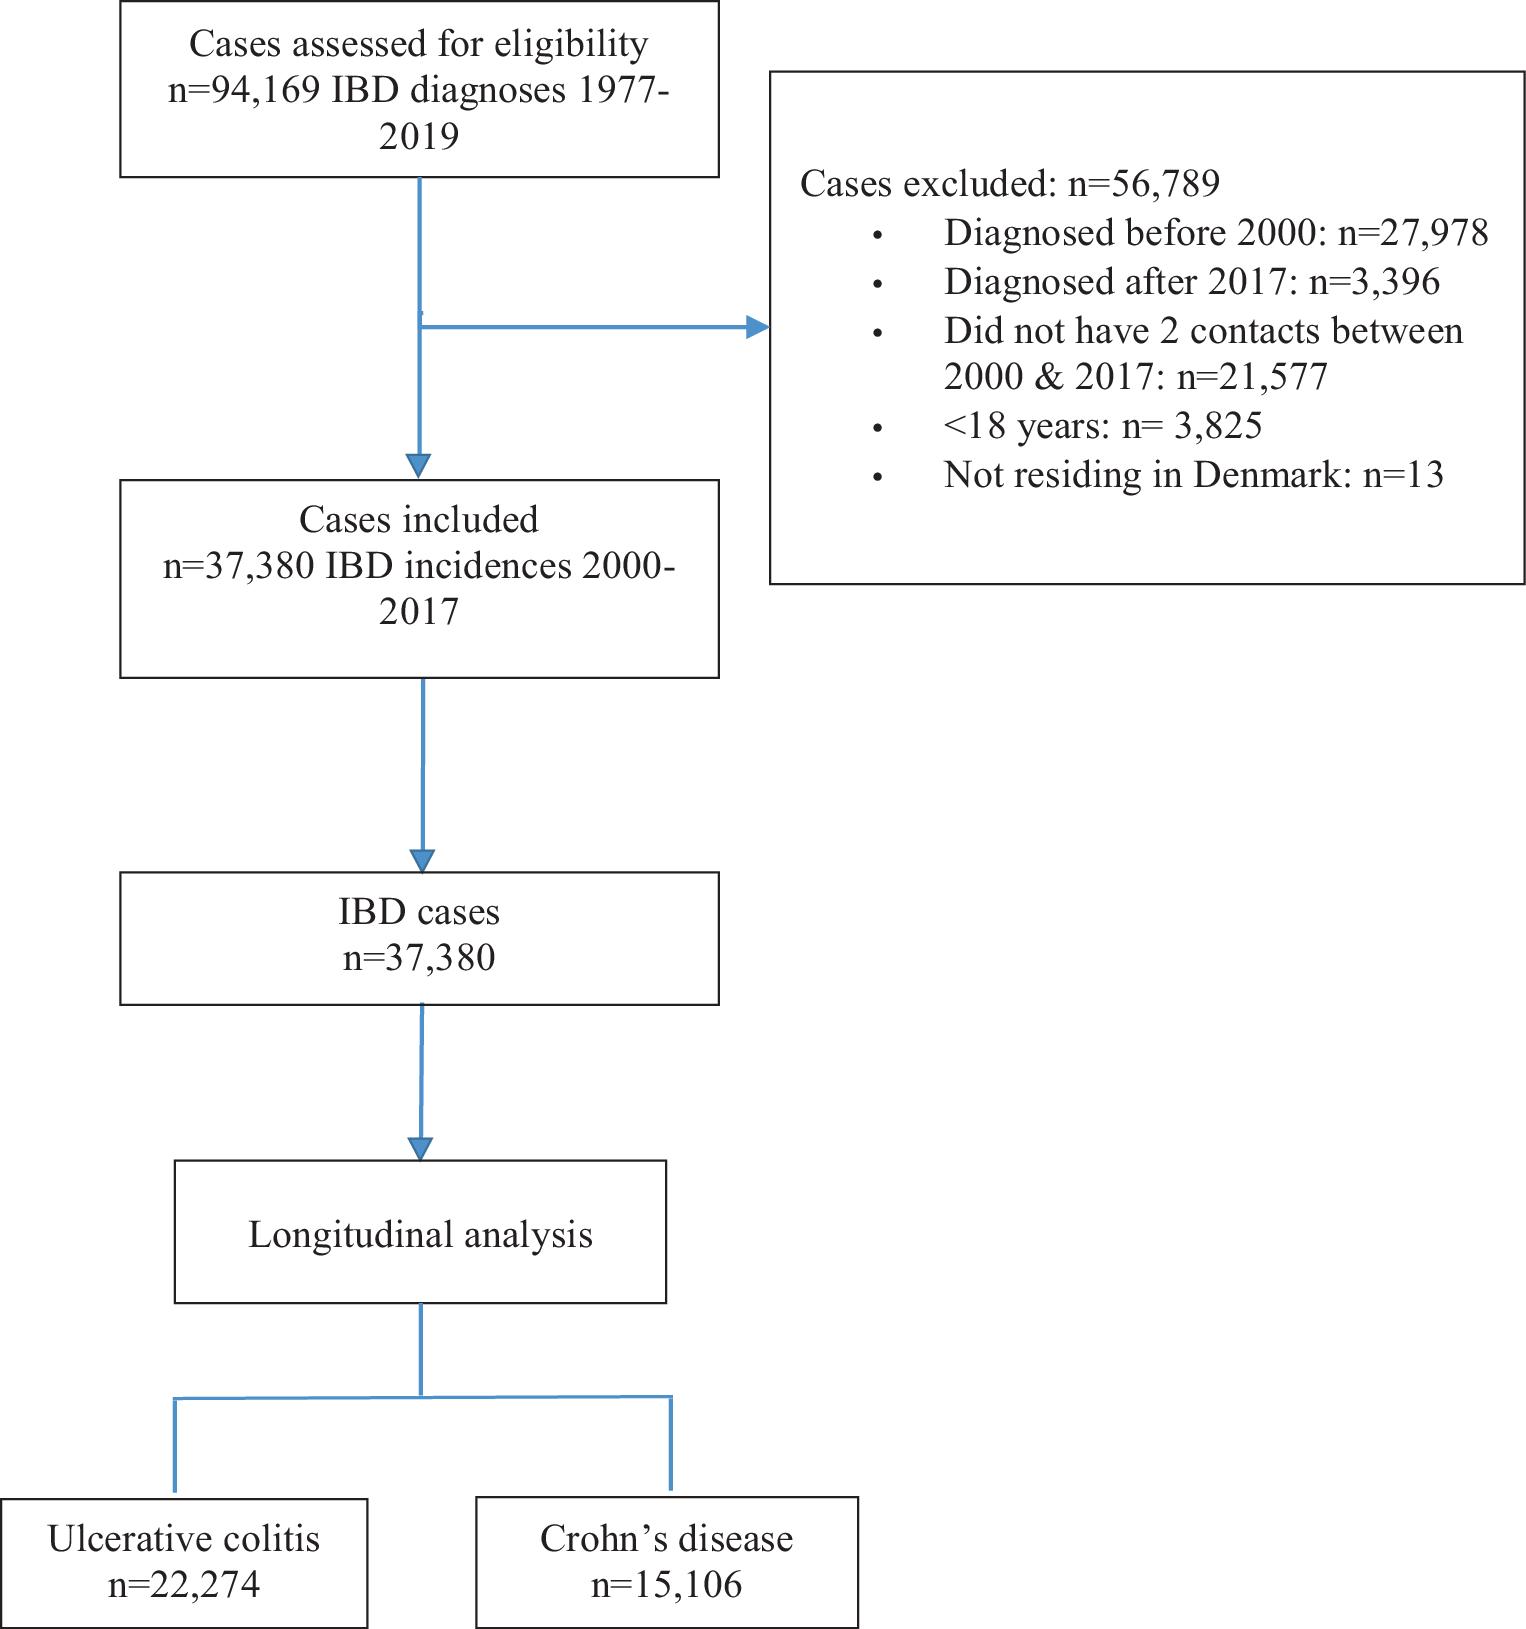 Socioeconomic equality in initiation of biologic treatment in Danish patients with inflammatory bowel disease